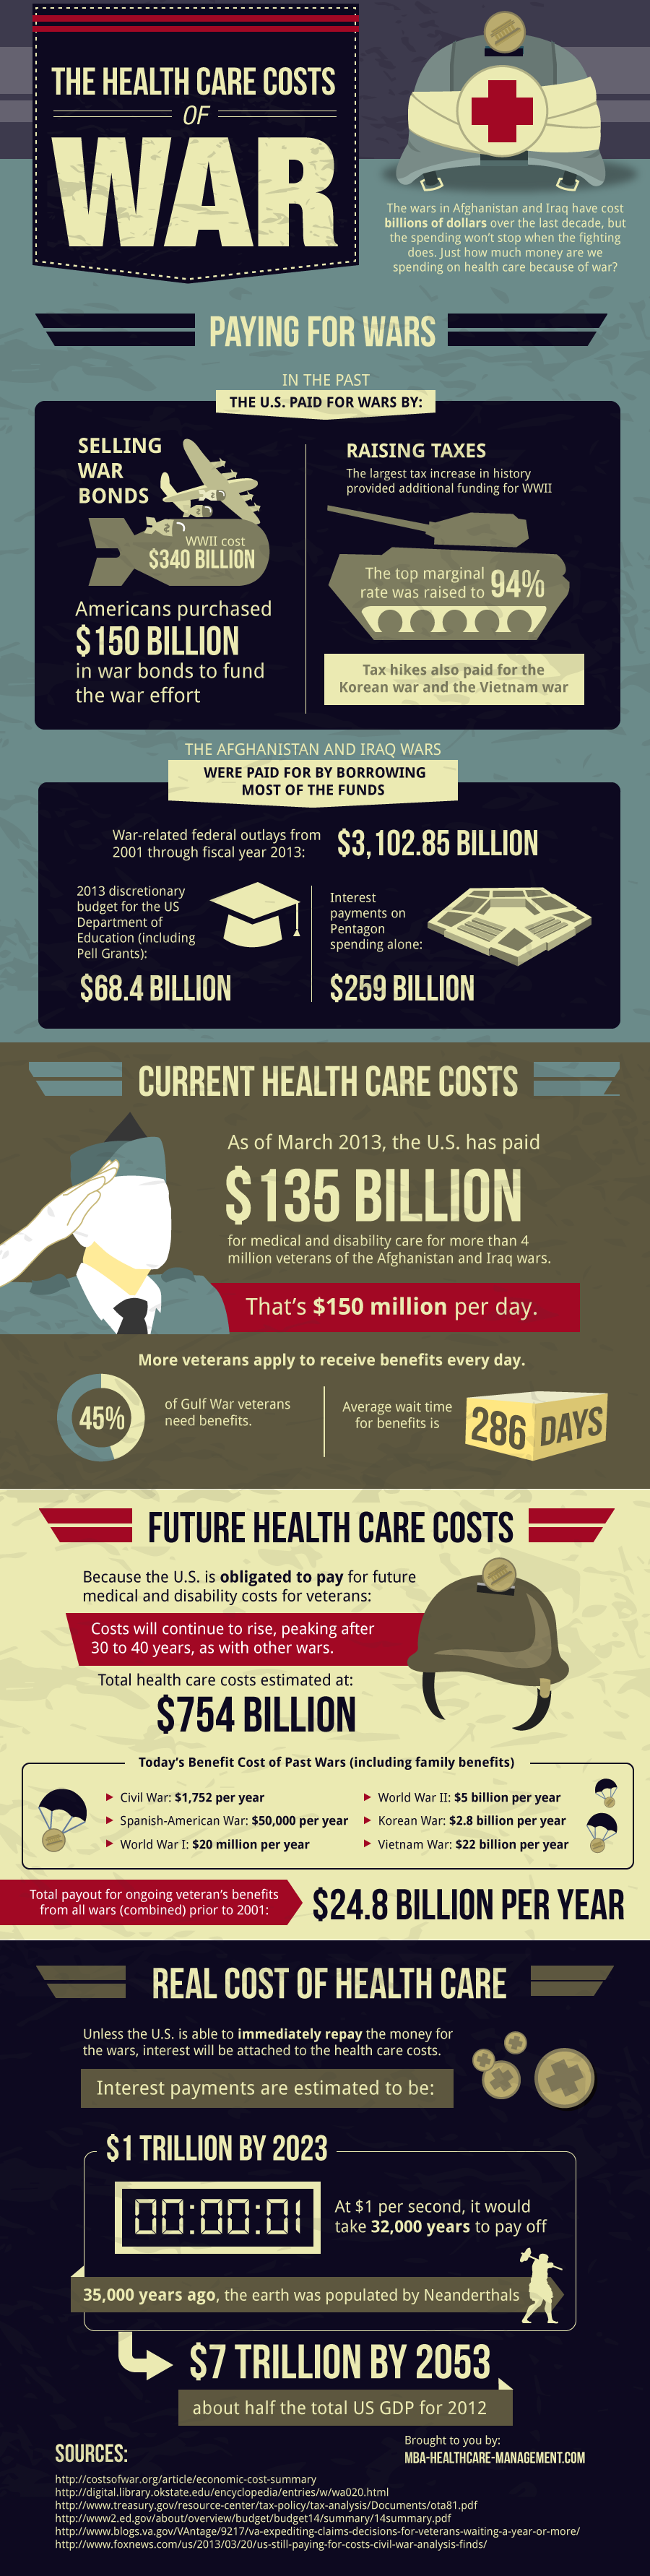 The Healthcare Costs of War